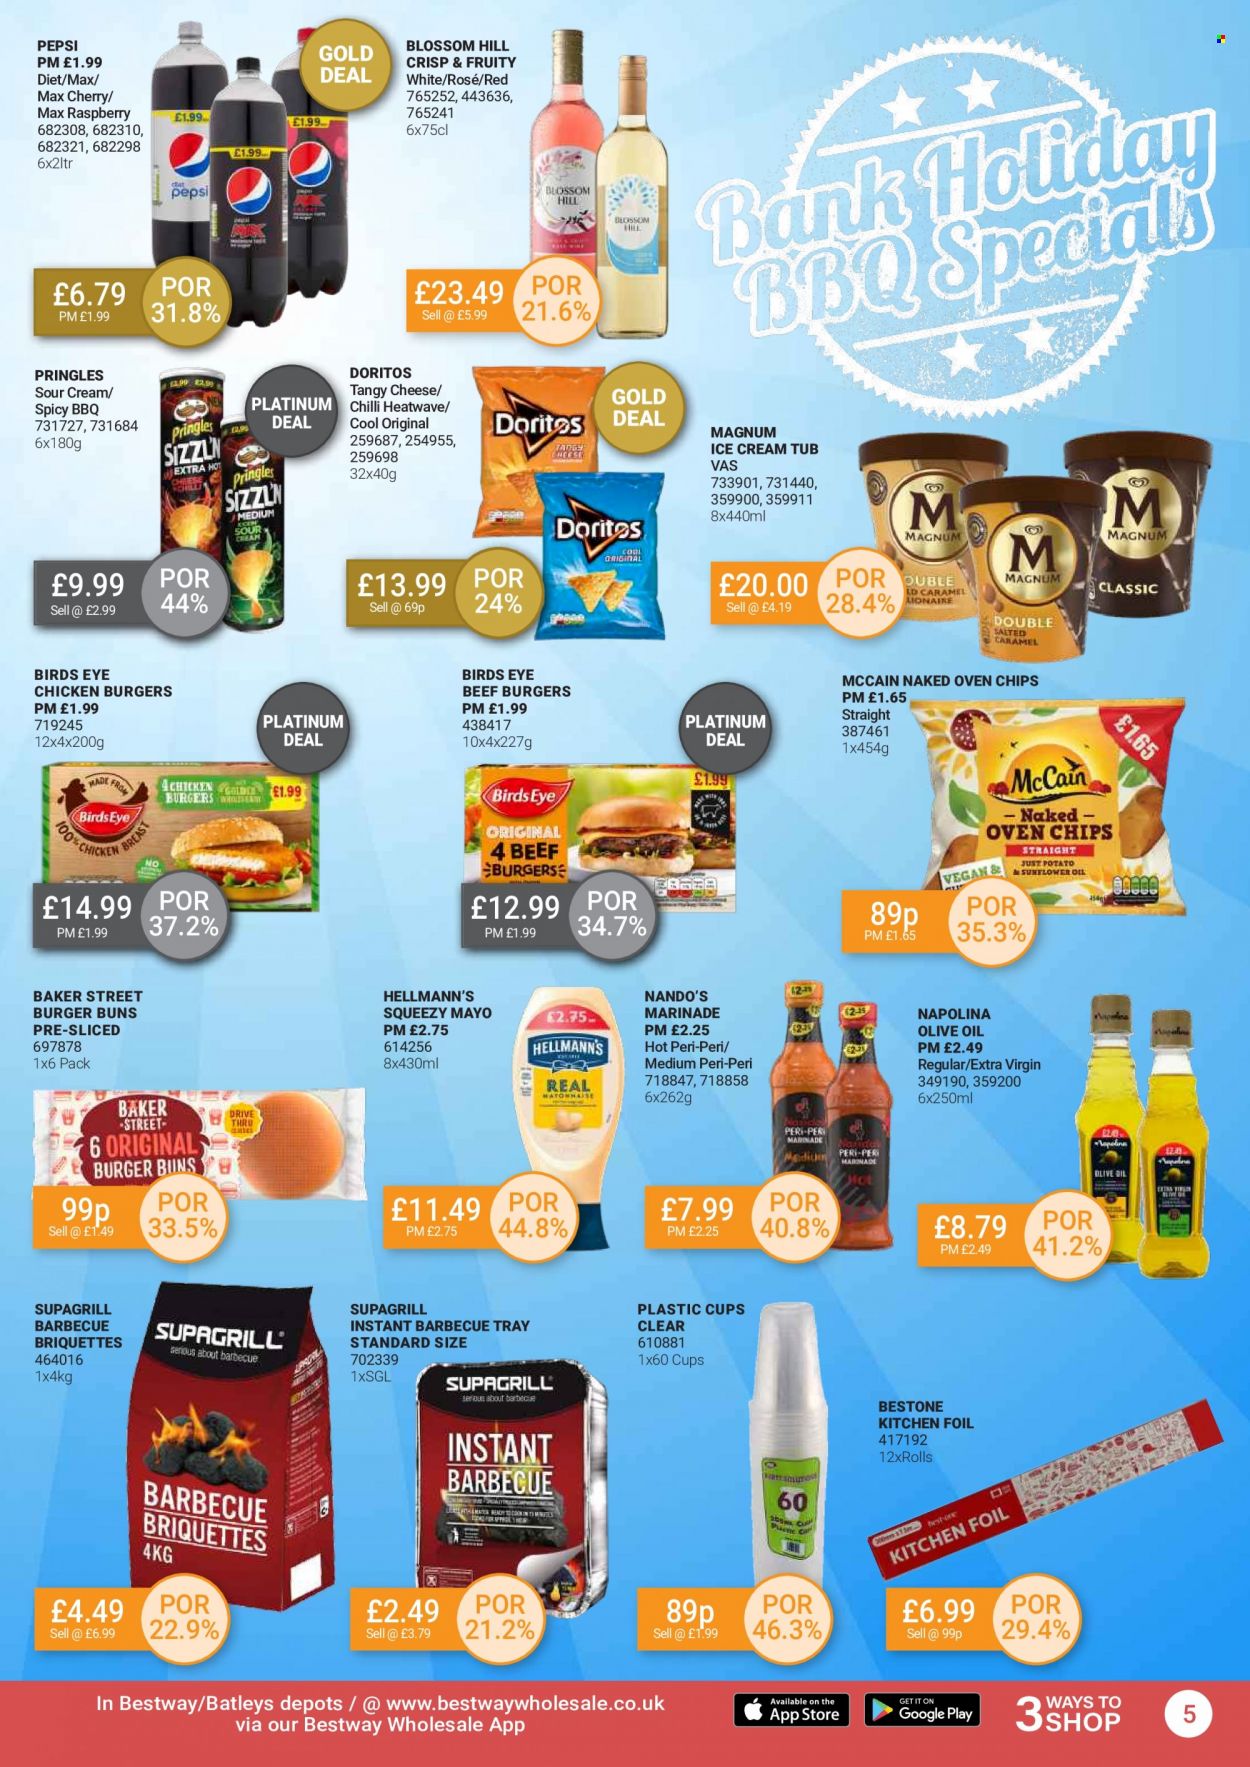 thumbnail - Bestway offer  - 29/04/2022 - 26/05/2022 - Sales products - cherries, buns, burger buns, Bird's Eye, beef burger, cheese, sour cream, mayonnaise, Hellmann’s, Magnum, ice cream, McCain, frozen chips, Doritos, Pringles, marinade, extra virgin olive oil, olive oil, oil, Pepsi, wine, rosé wine, tray, cup, kitchen foil. Page 5.